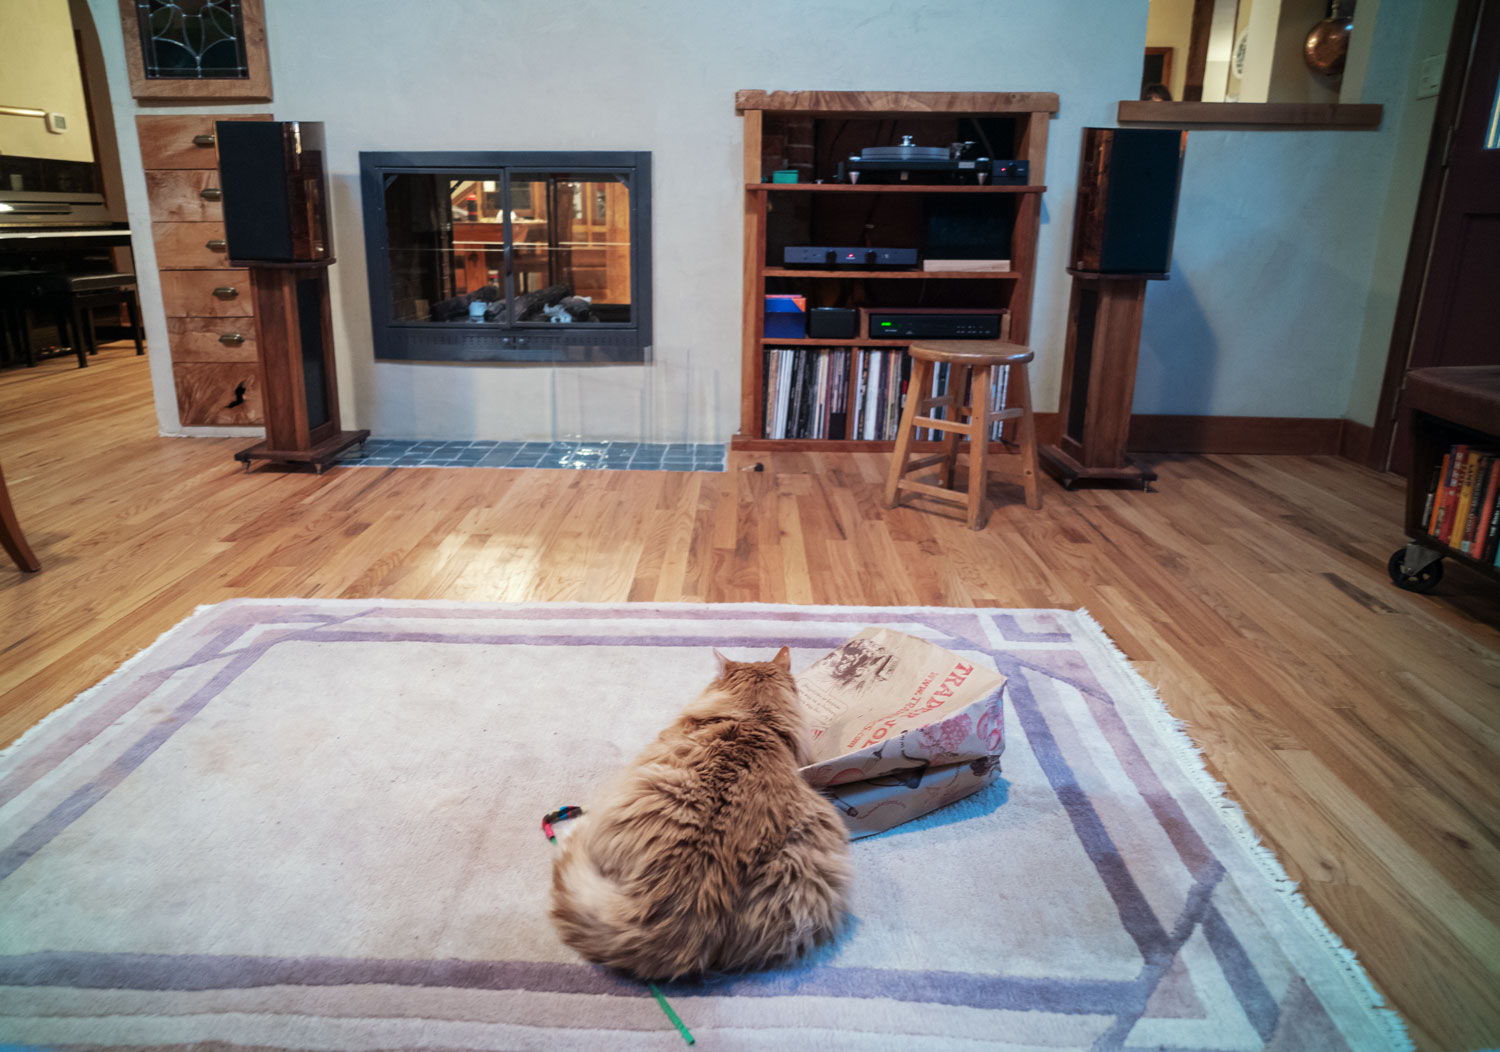 Our audiophile cat